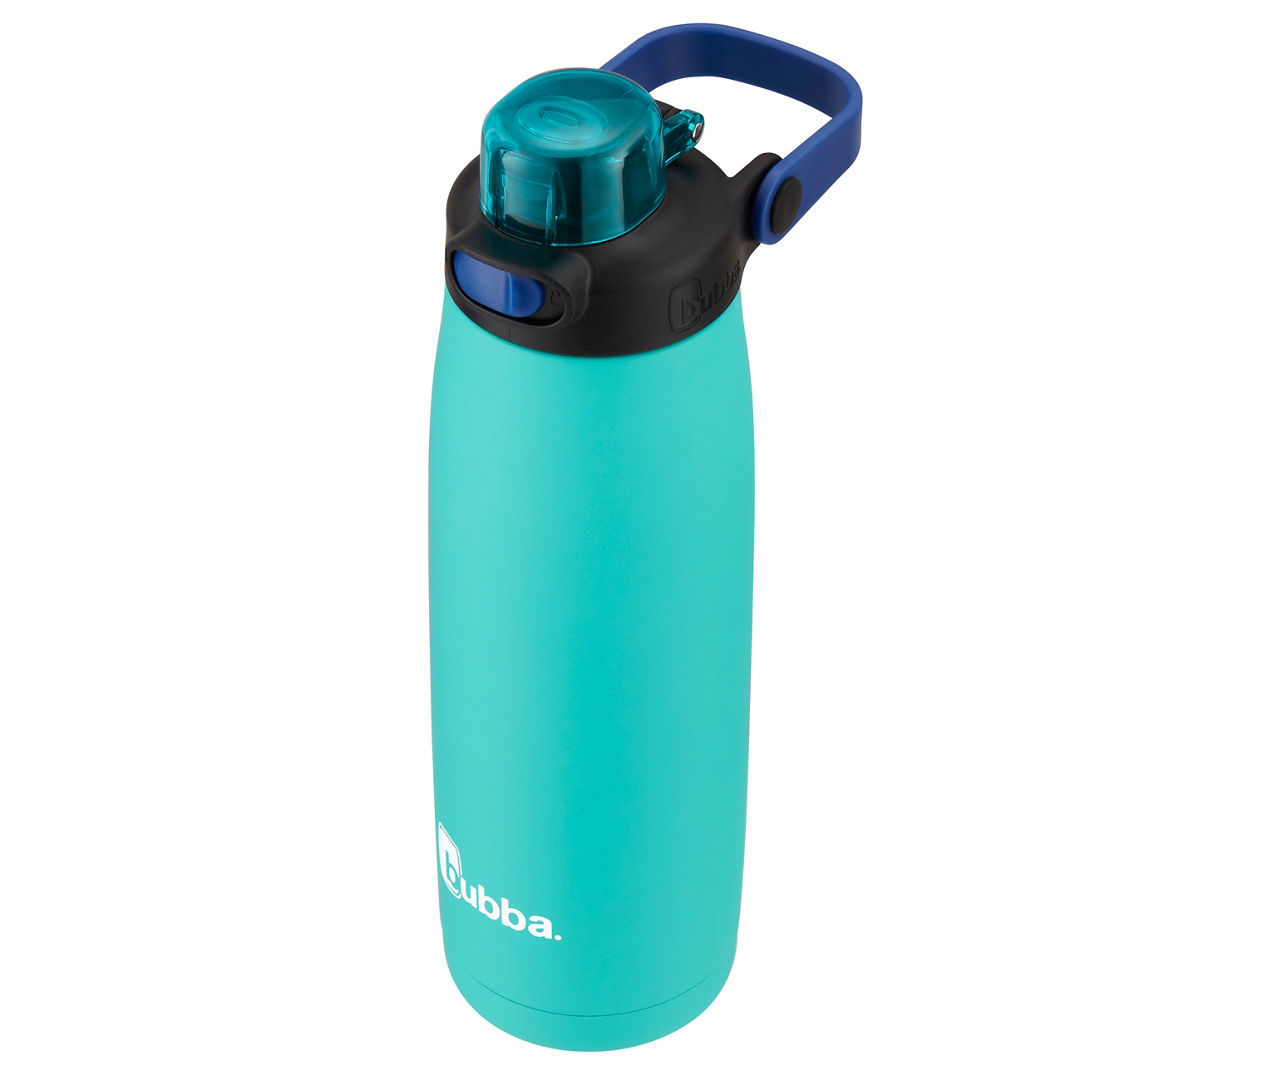  Bubba Radiant Vacuum-Insulated Stainless Steel Water